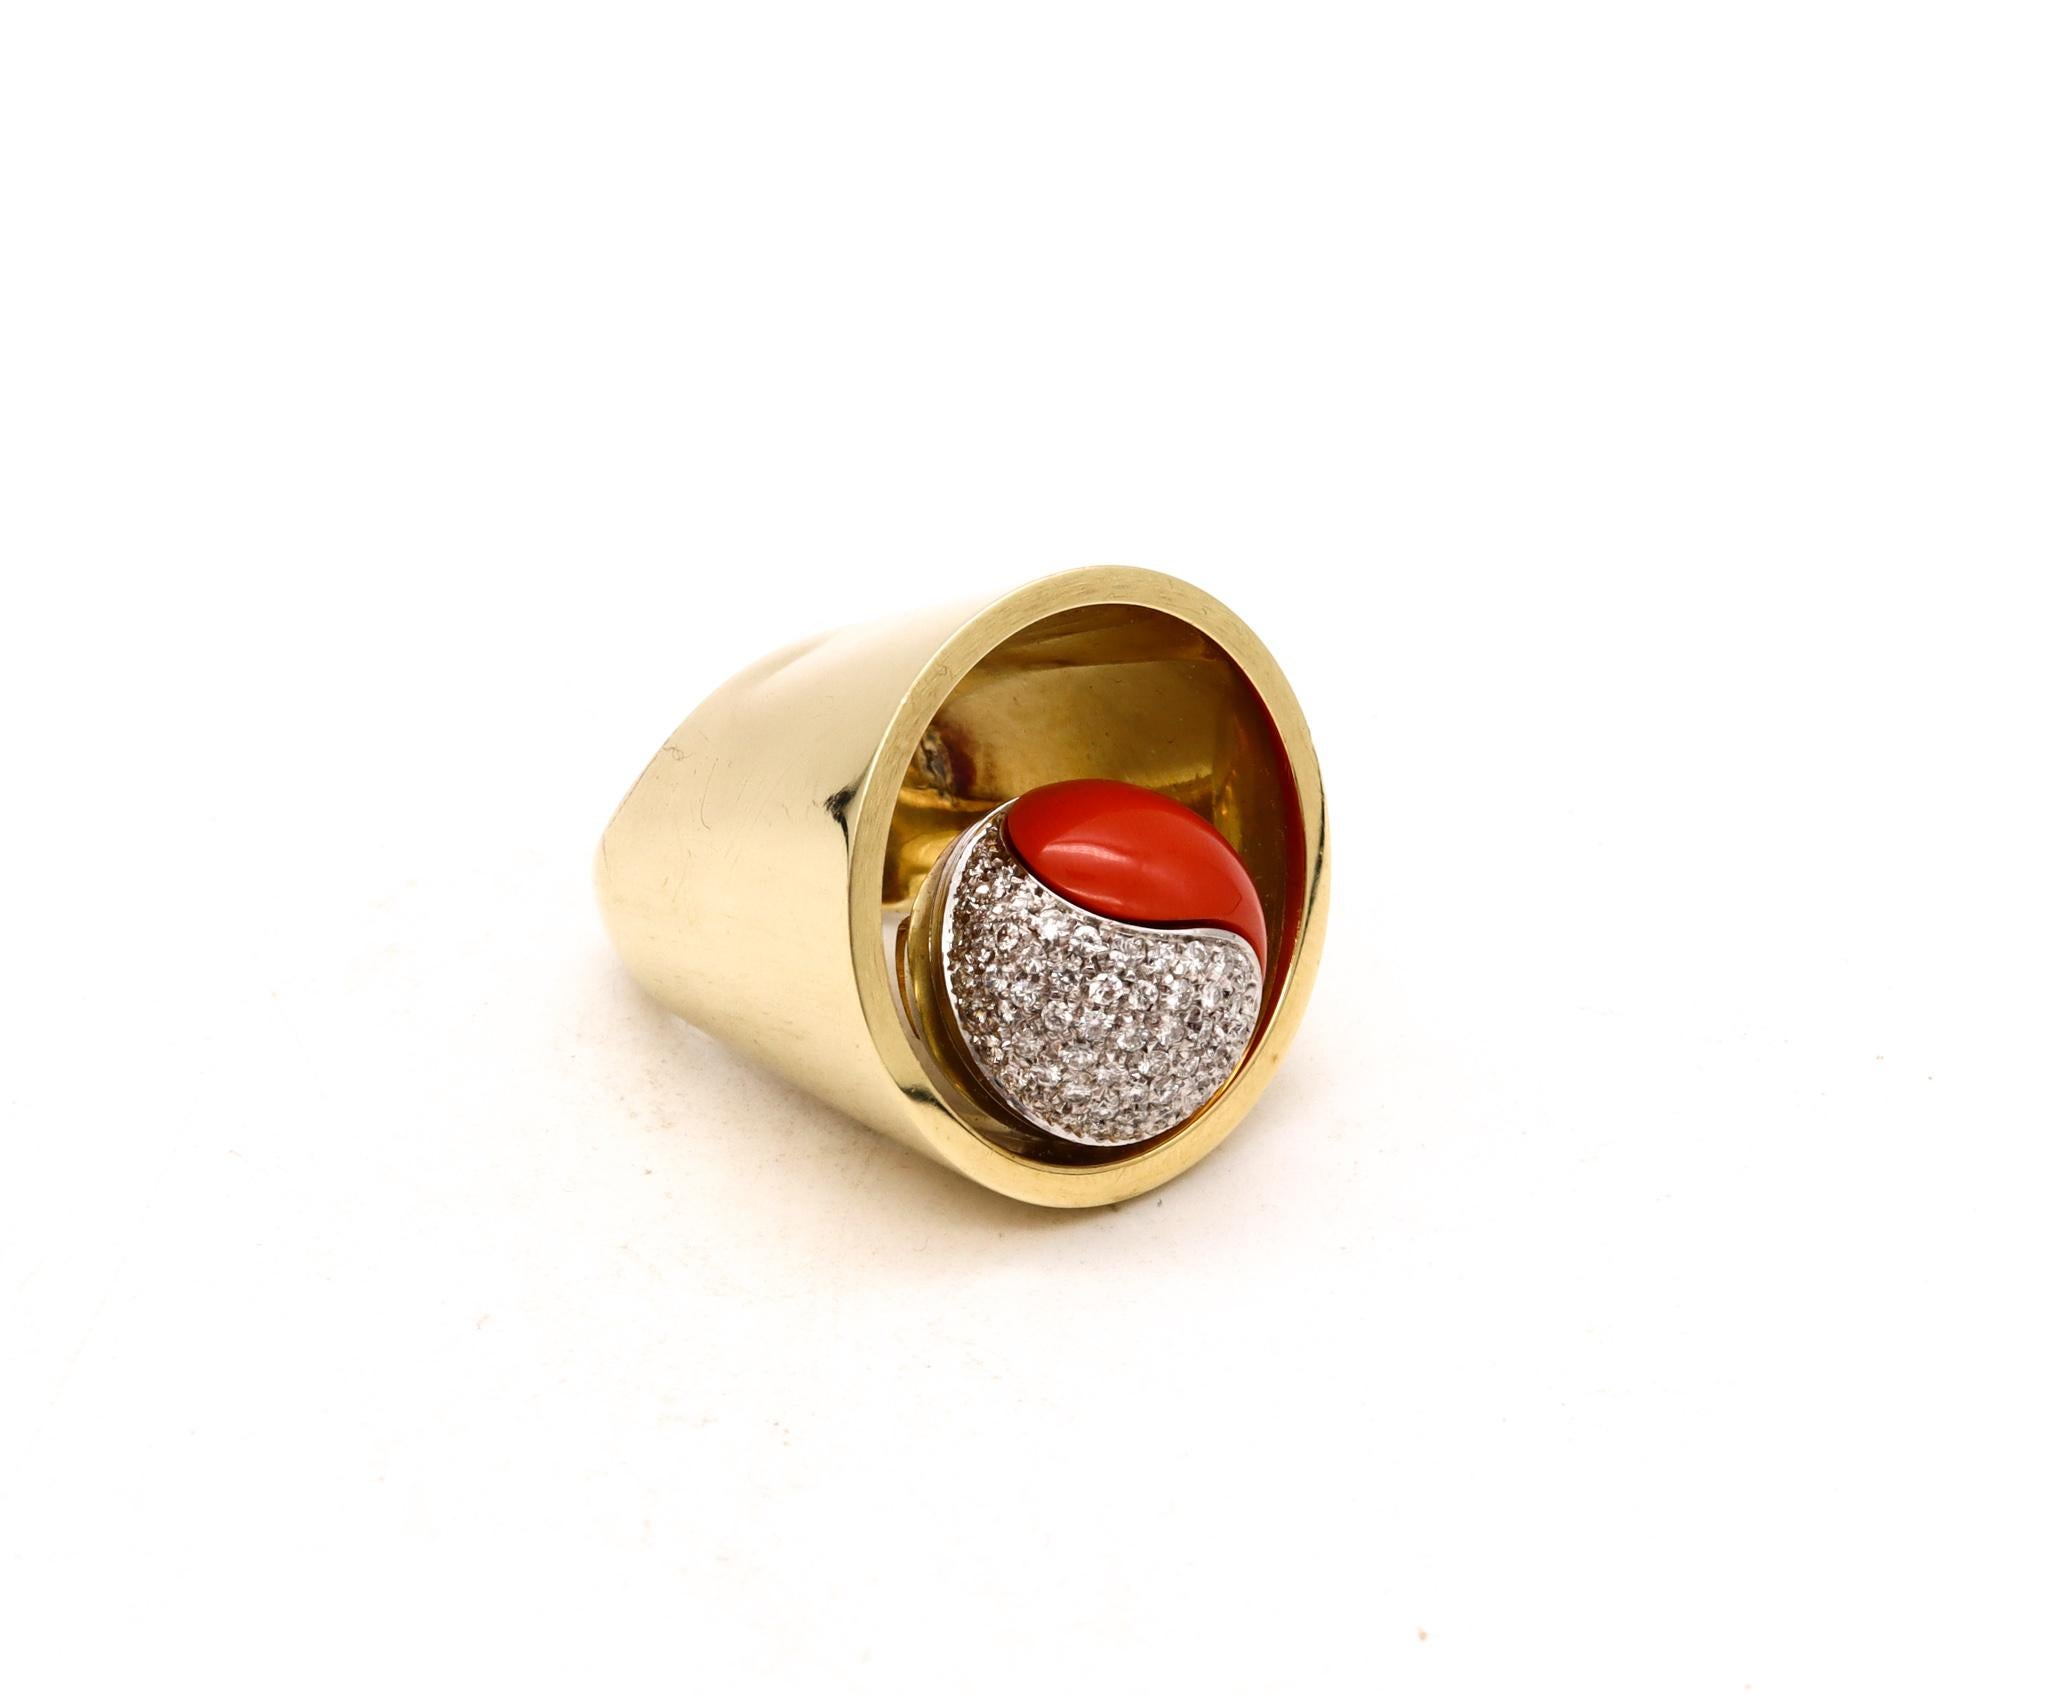 Modernist Spatialism 1970 Artistic Sculptural Yin Yang Ring 18Kt Gold With Diamonds Coral For Sale